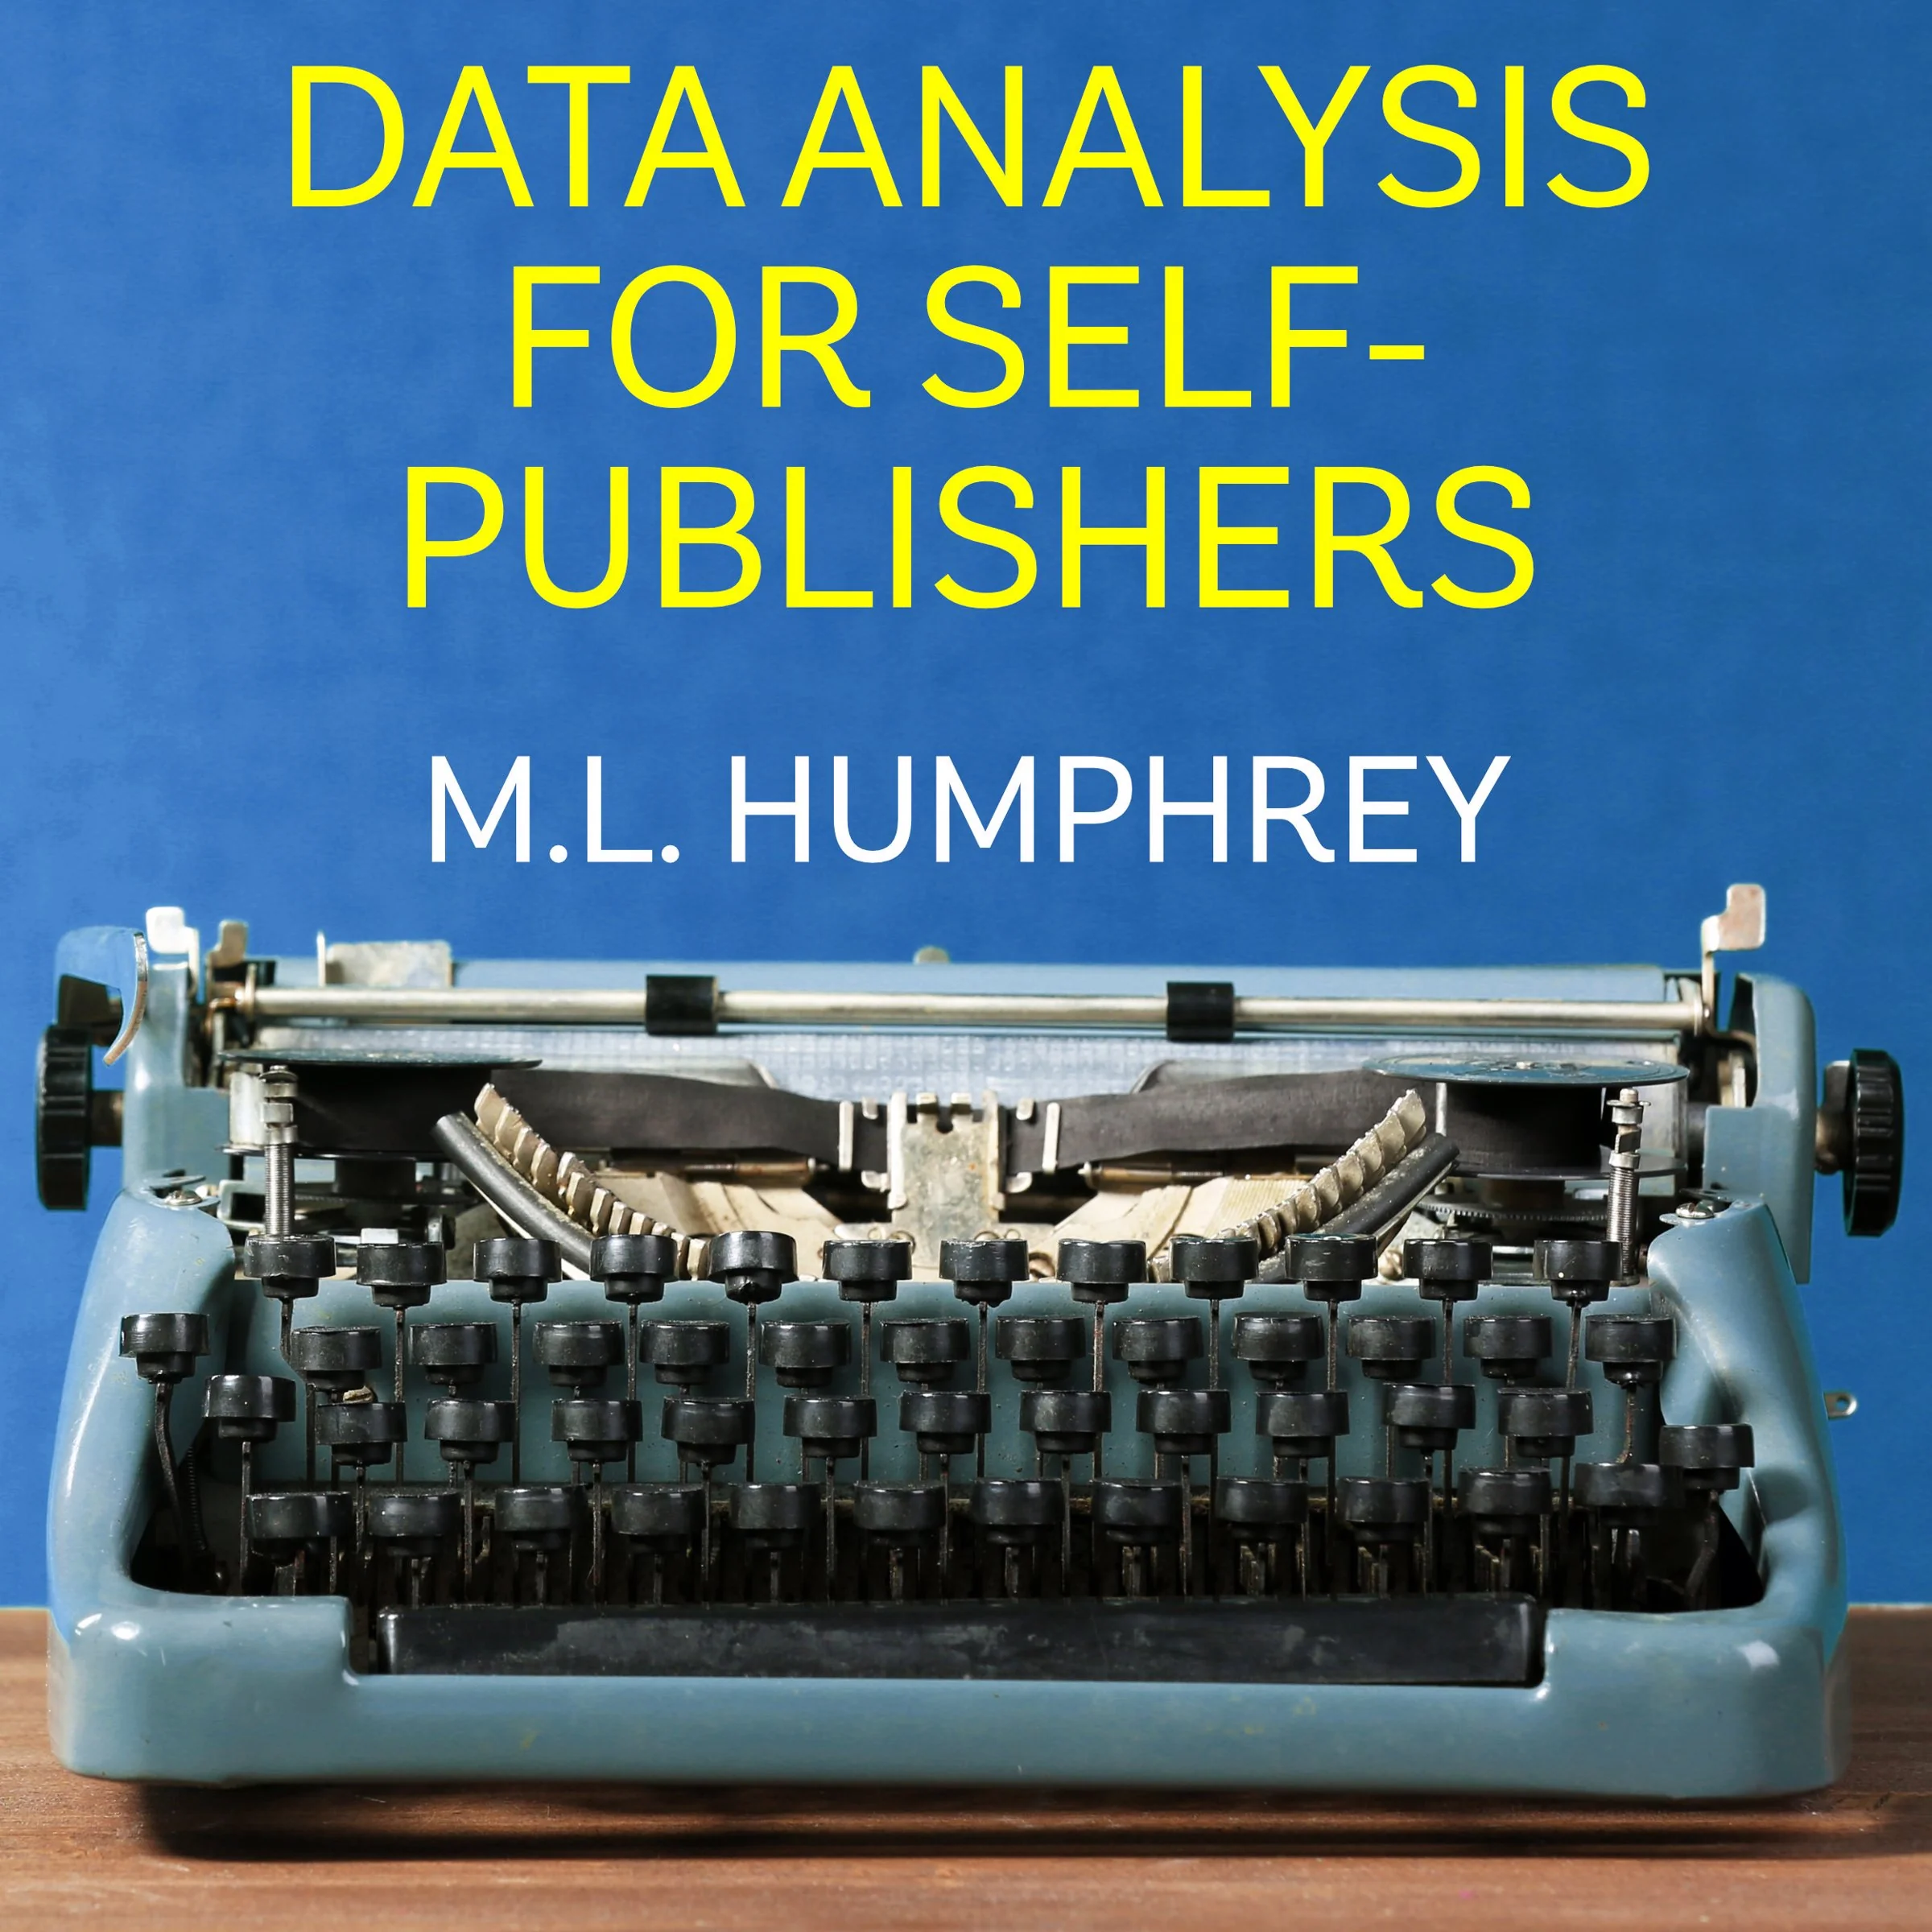 Data Analysis for Self-Publishers Audiobook by M.L. Humphrey